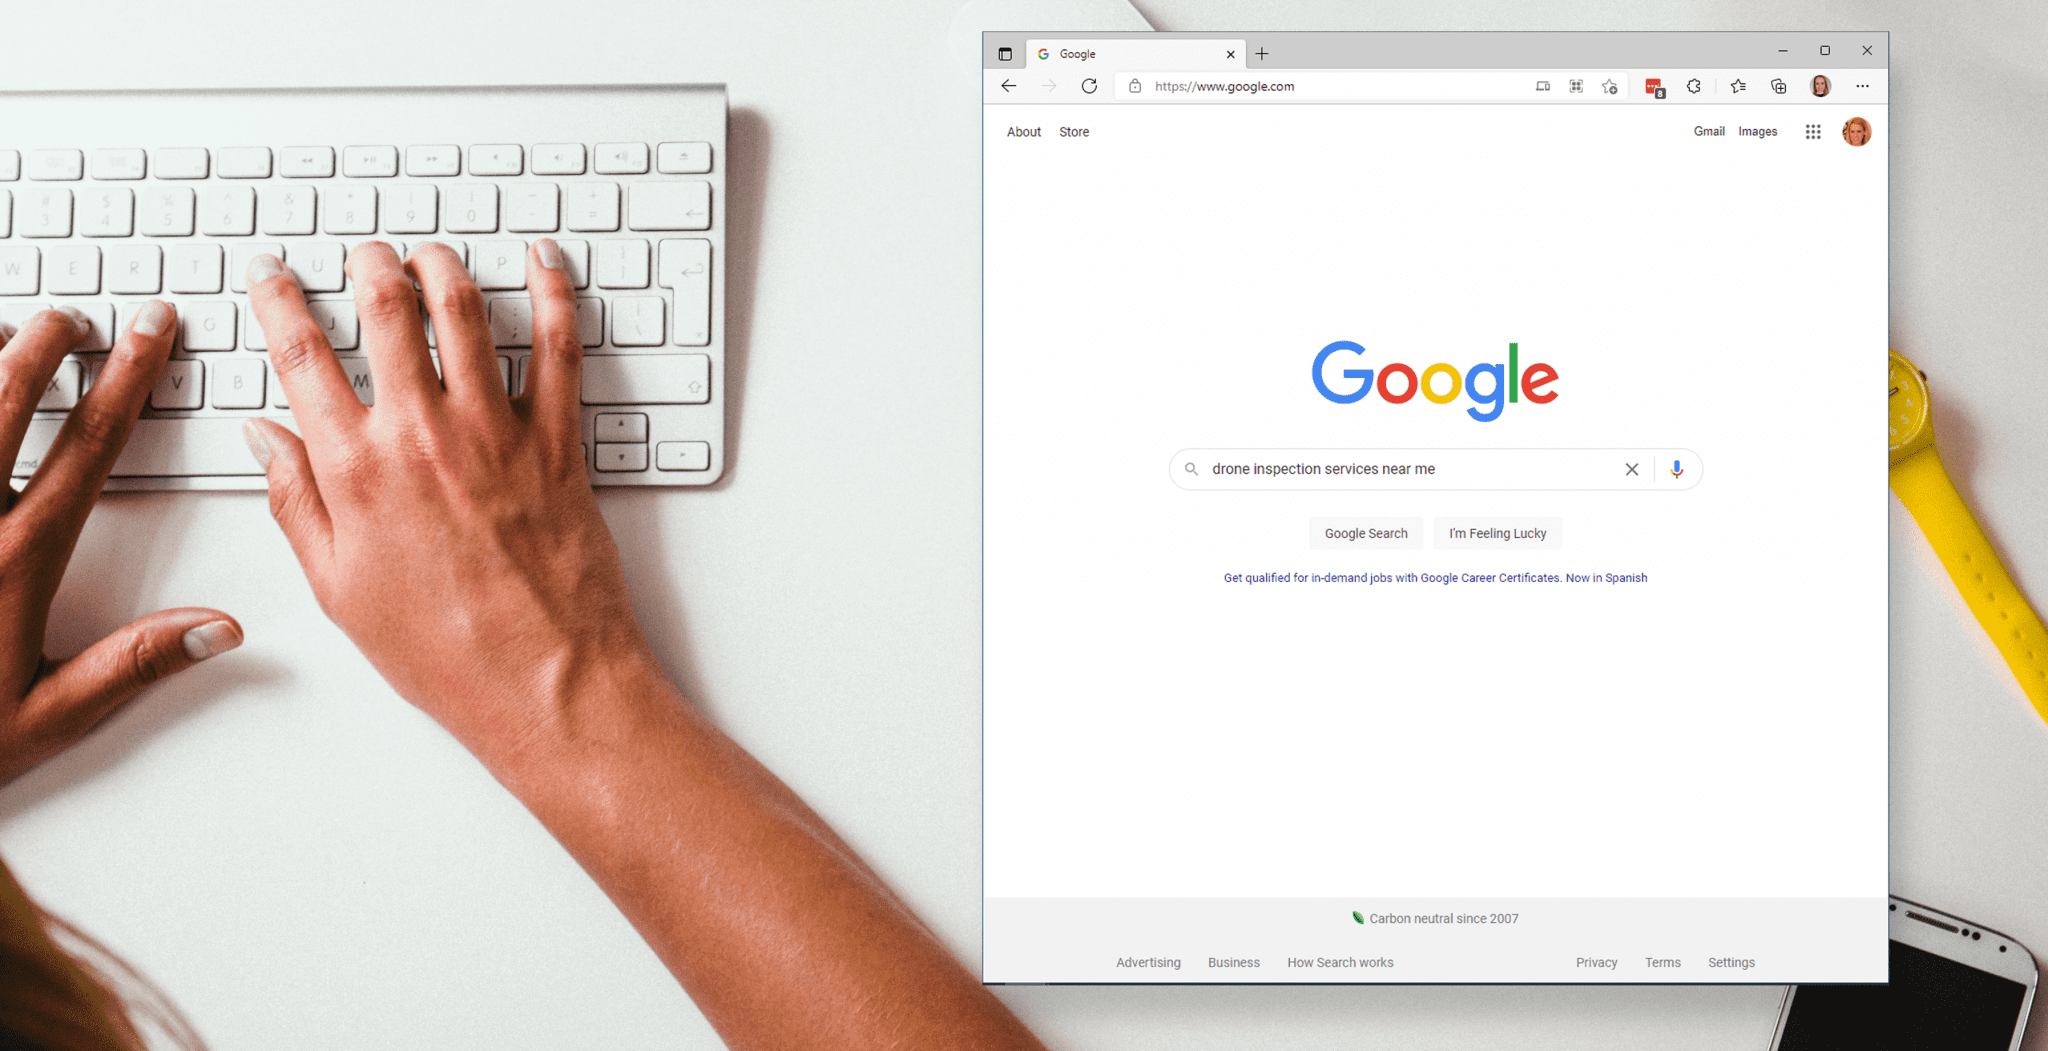 Screenshoot of a Google search page on top of an image of a person typing on their keyboard